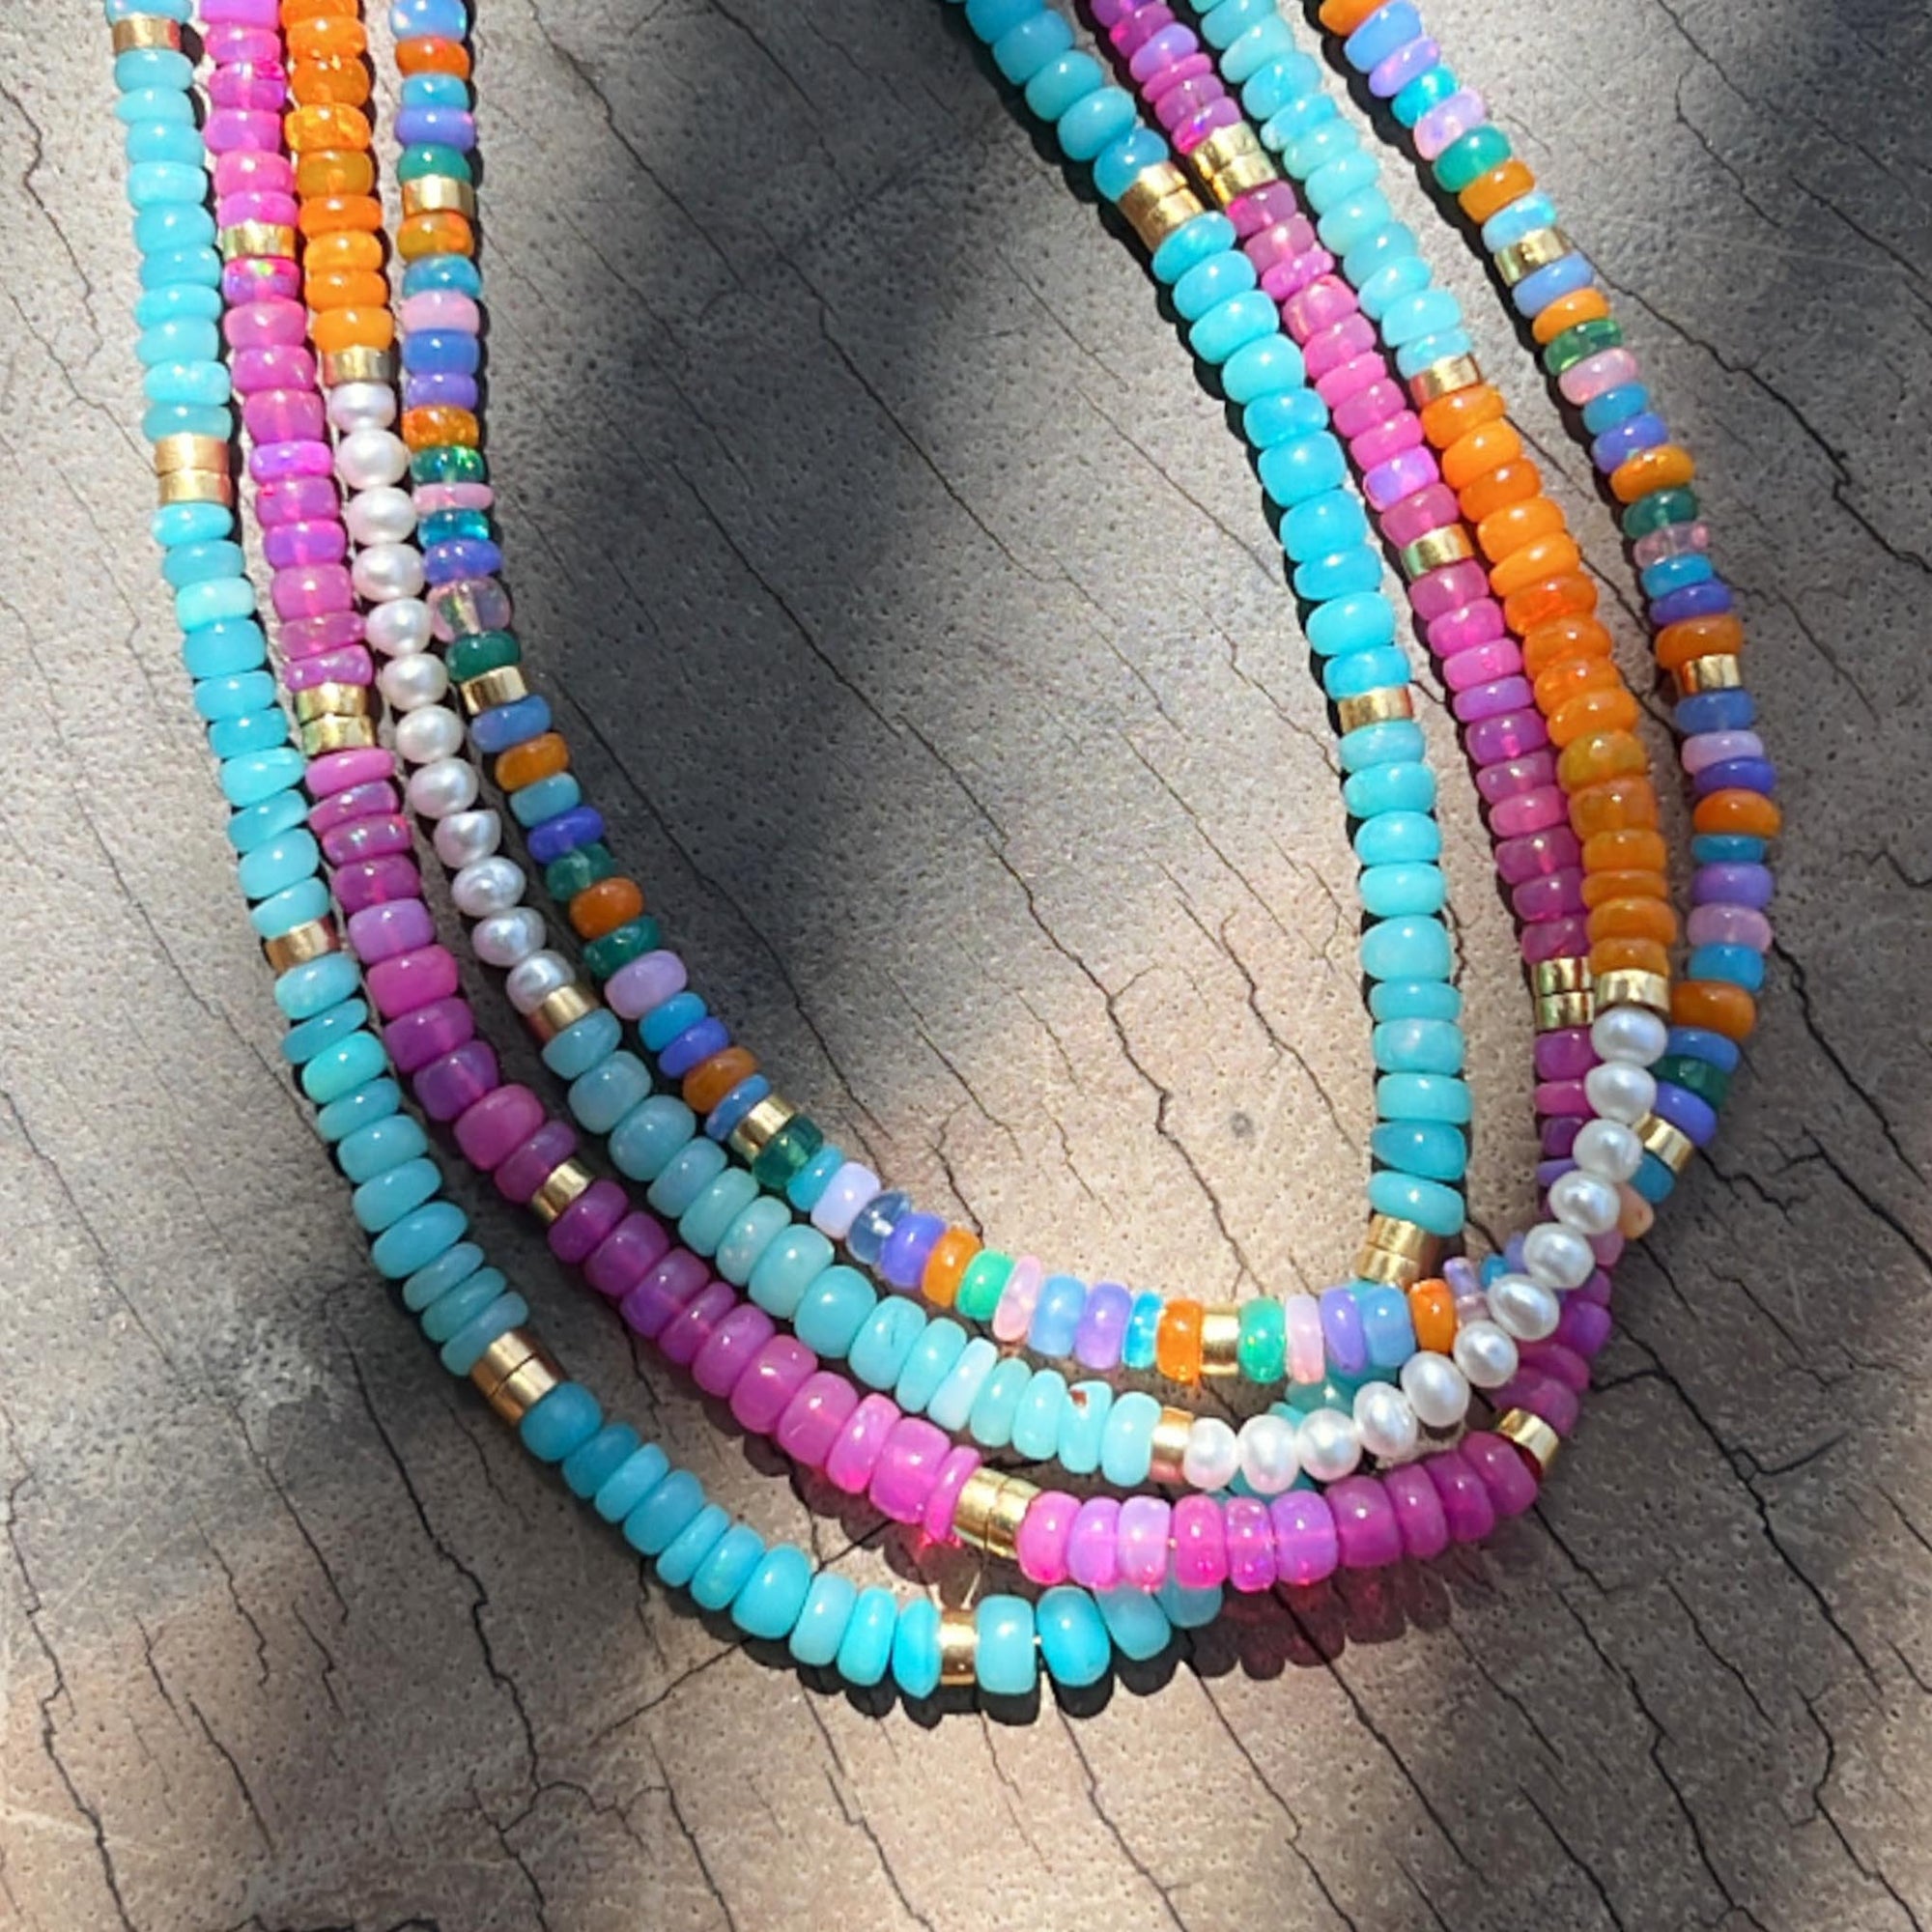 Jewelry, Necklace Multi Colored Necklace With Unique Beads